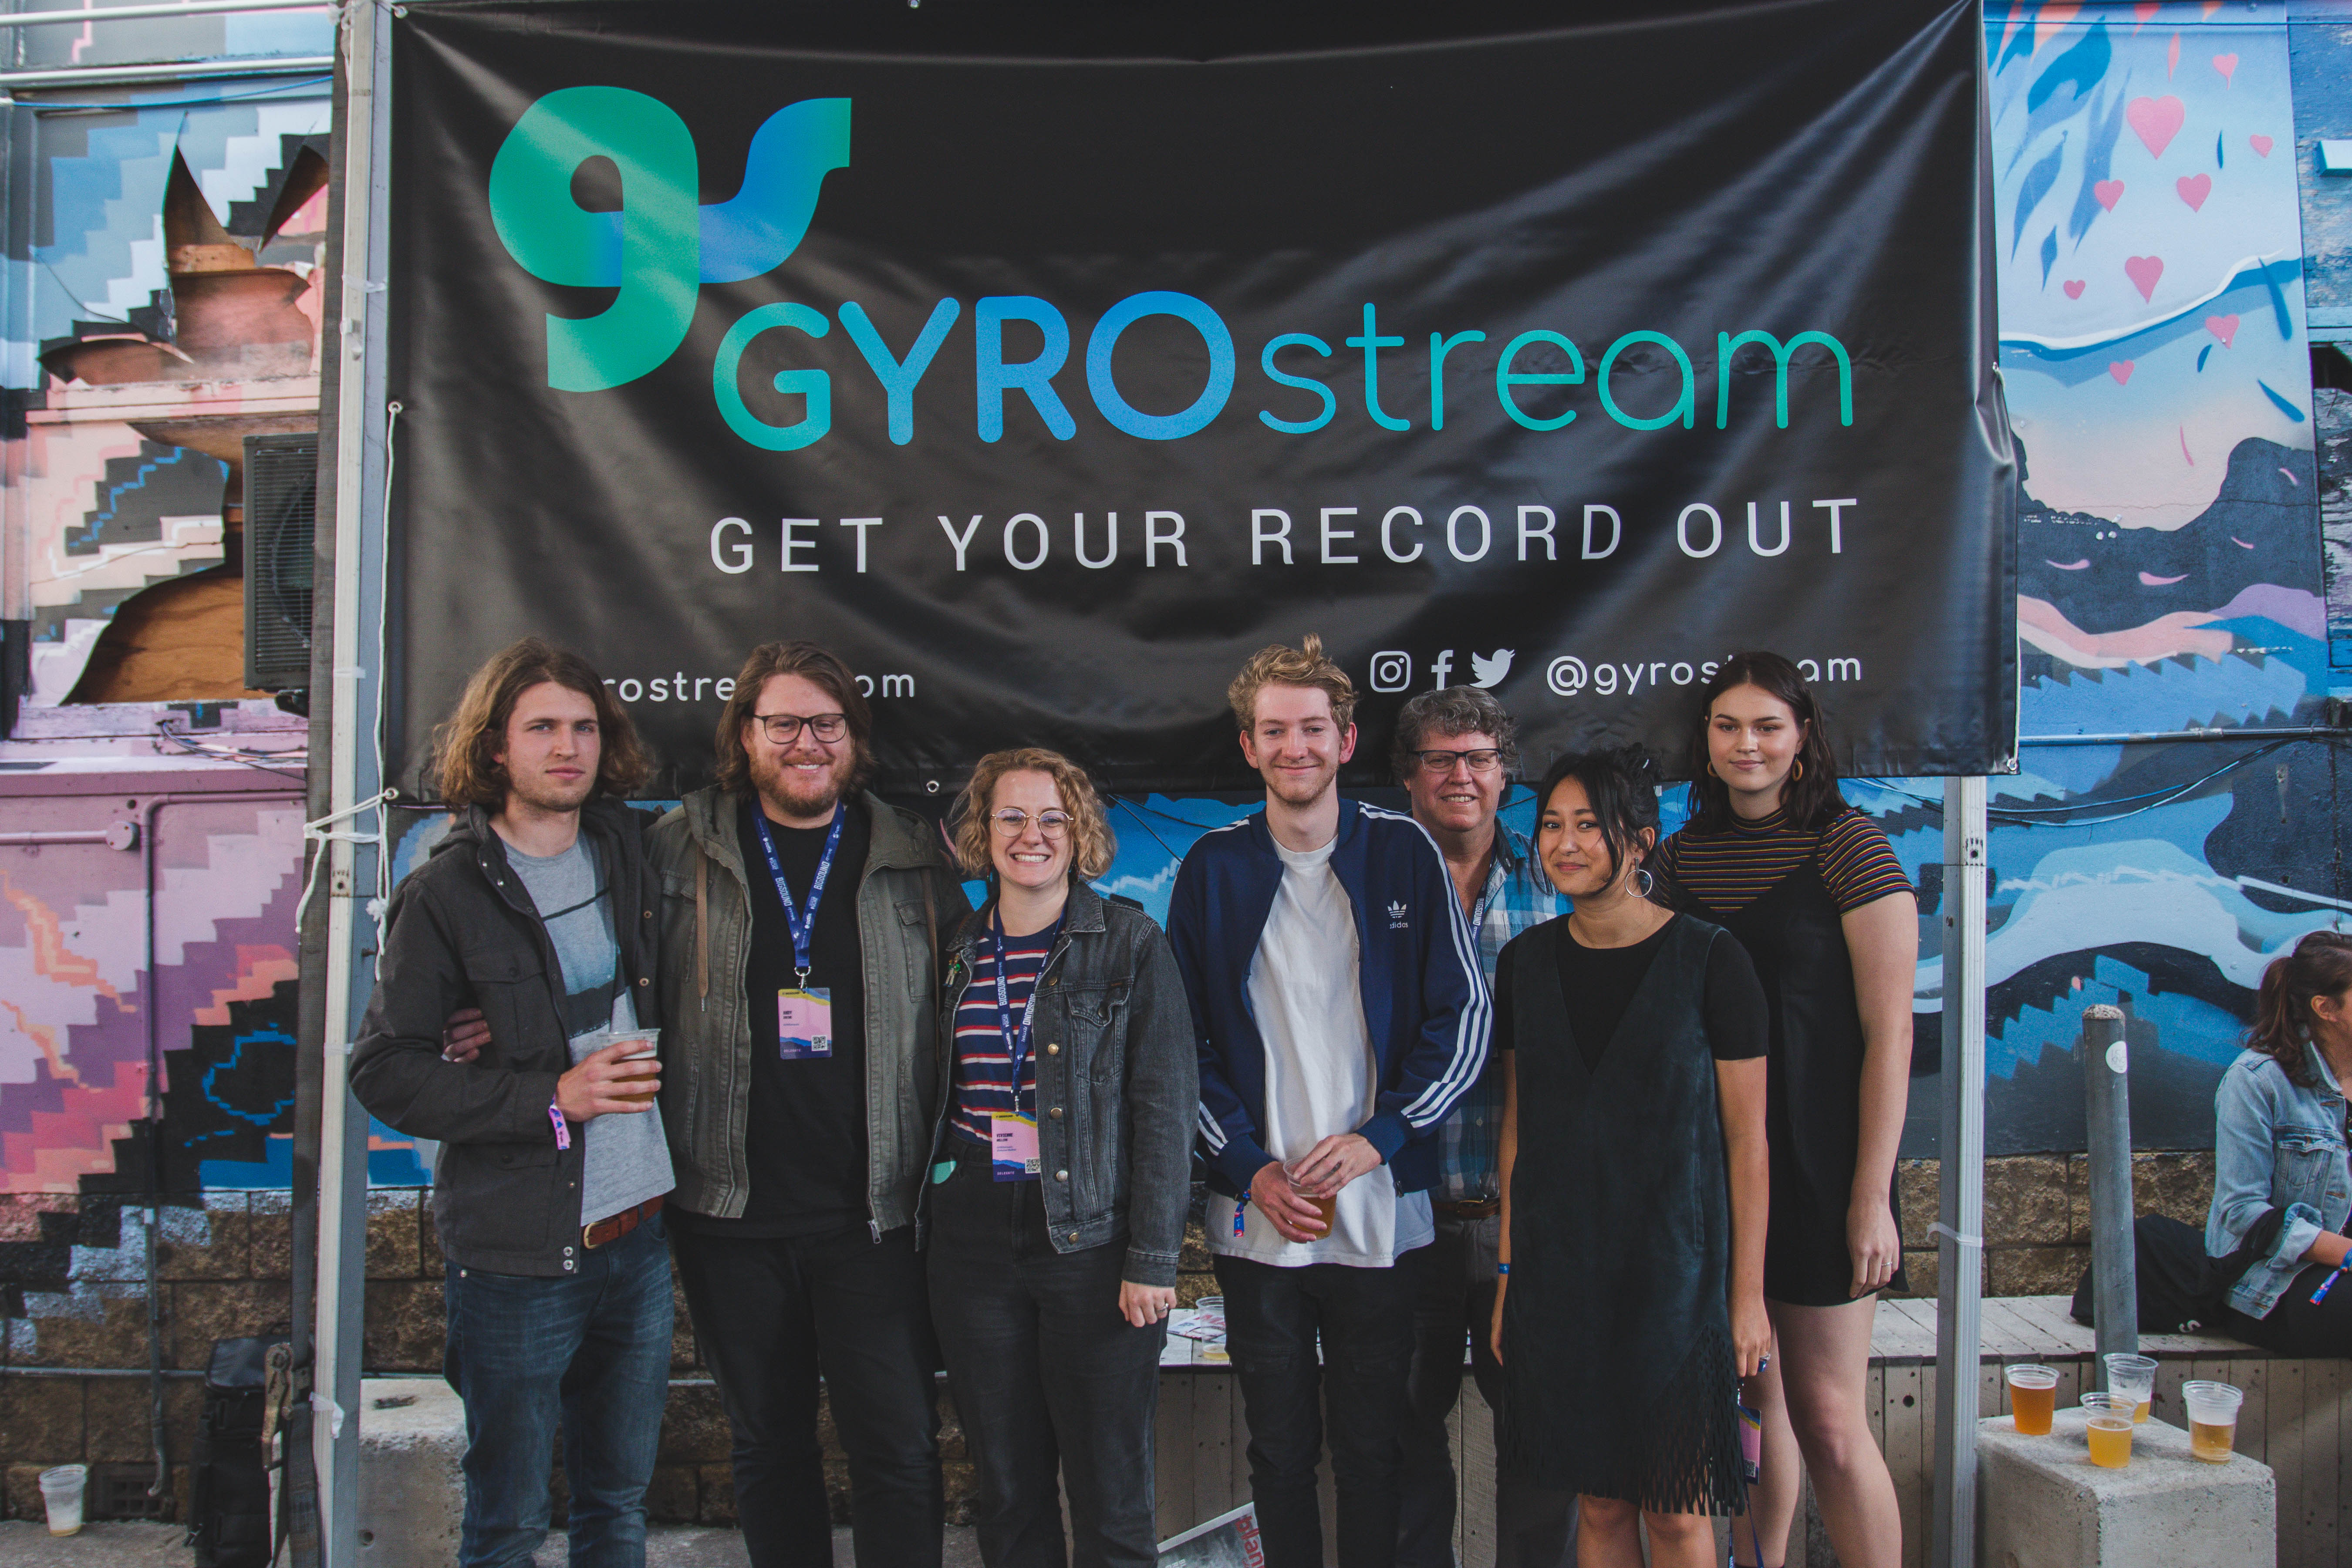 Exclusive: Aussie distributor GYROstream on Spotify’s direct artist upload strategy – “Independent artists need extra support services”